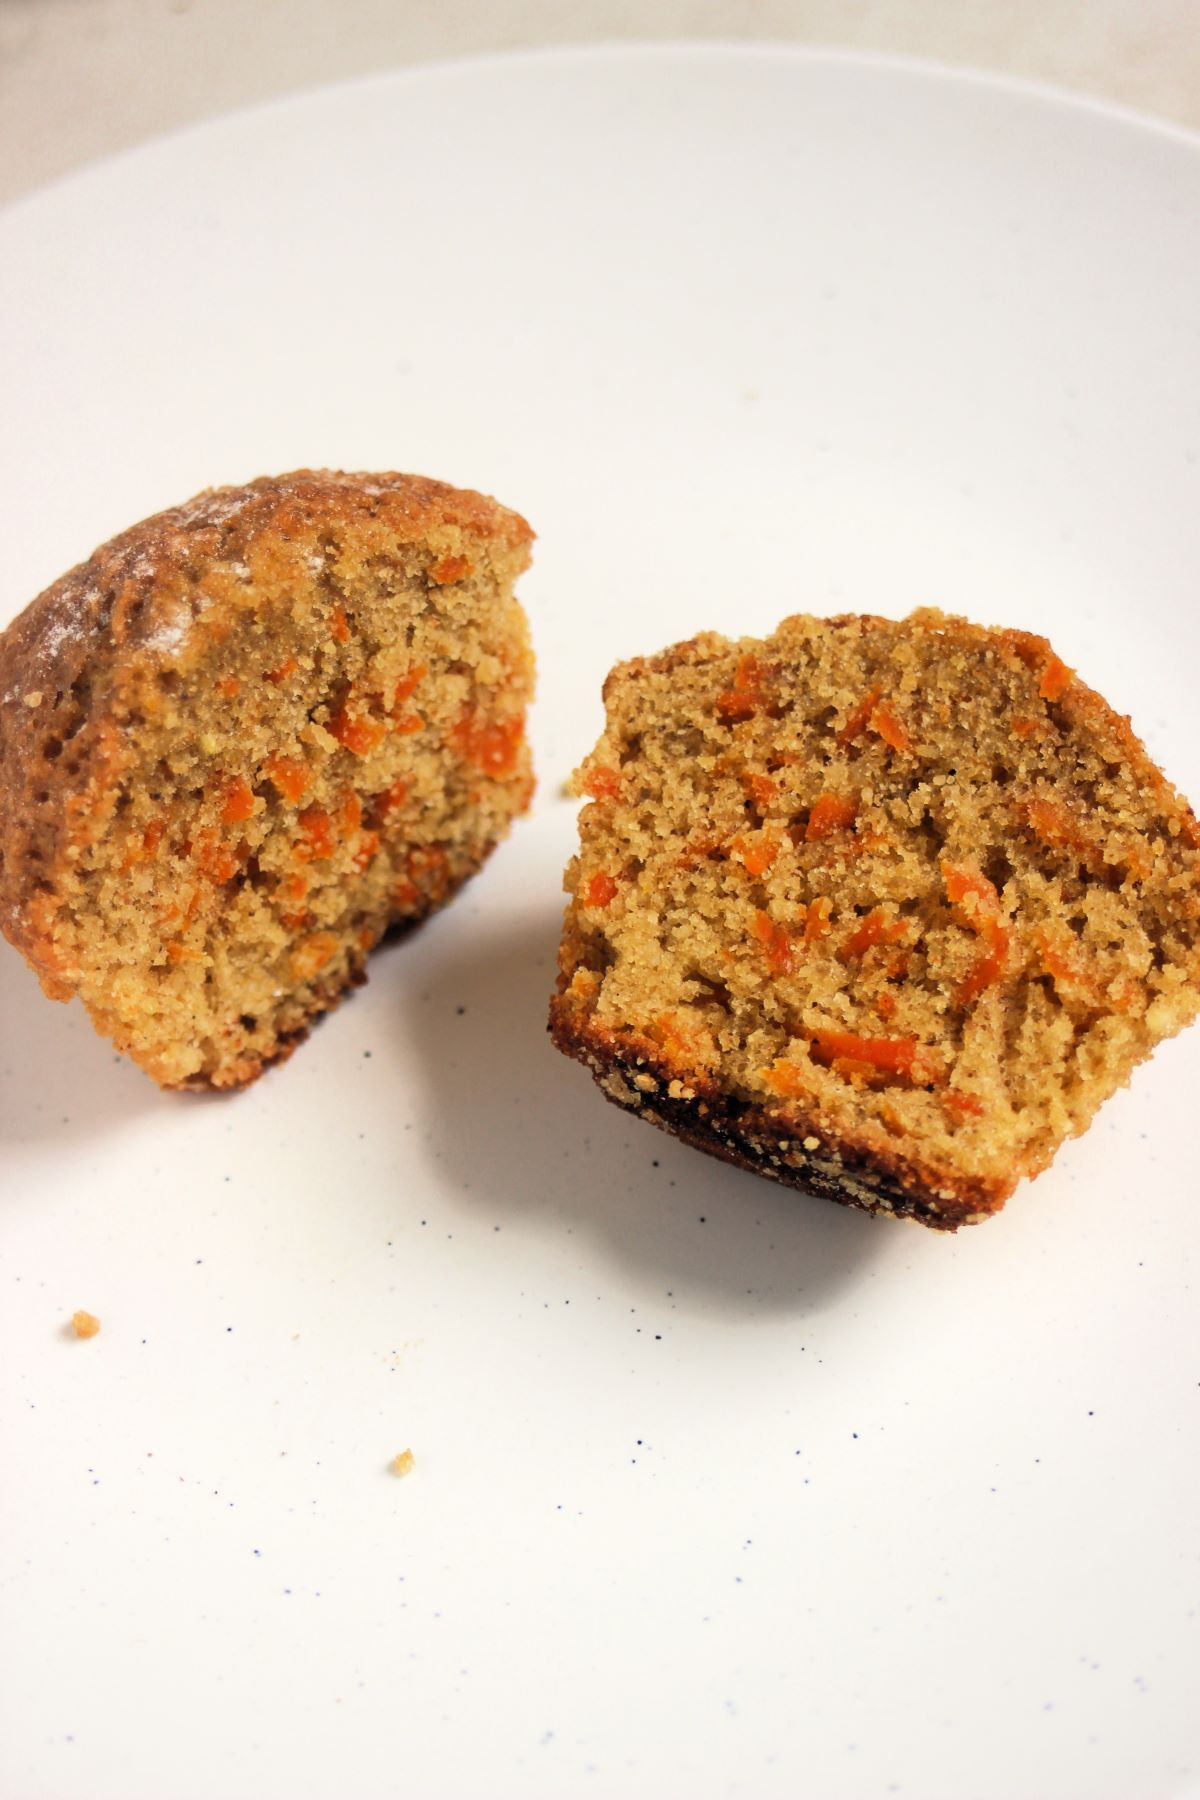 A carrot cake muffin cut in two on a white plate.